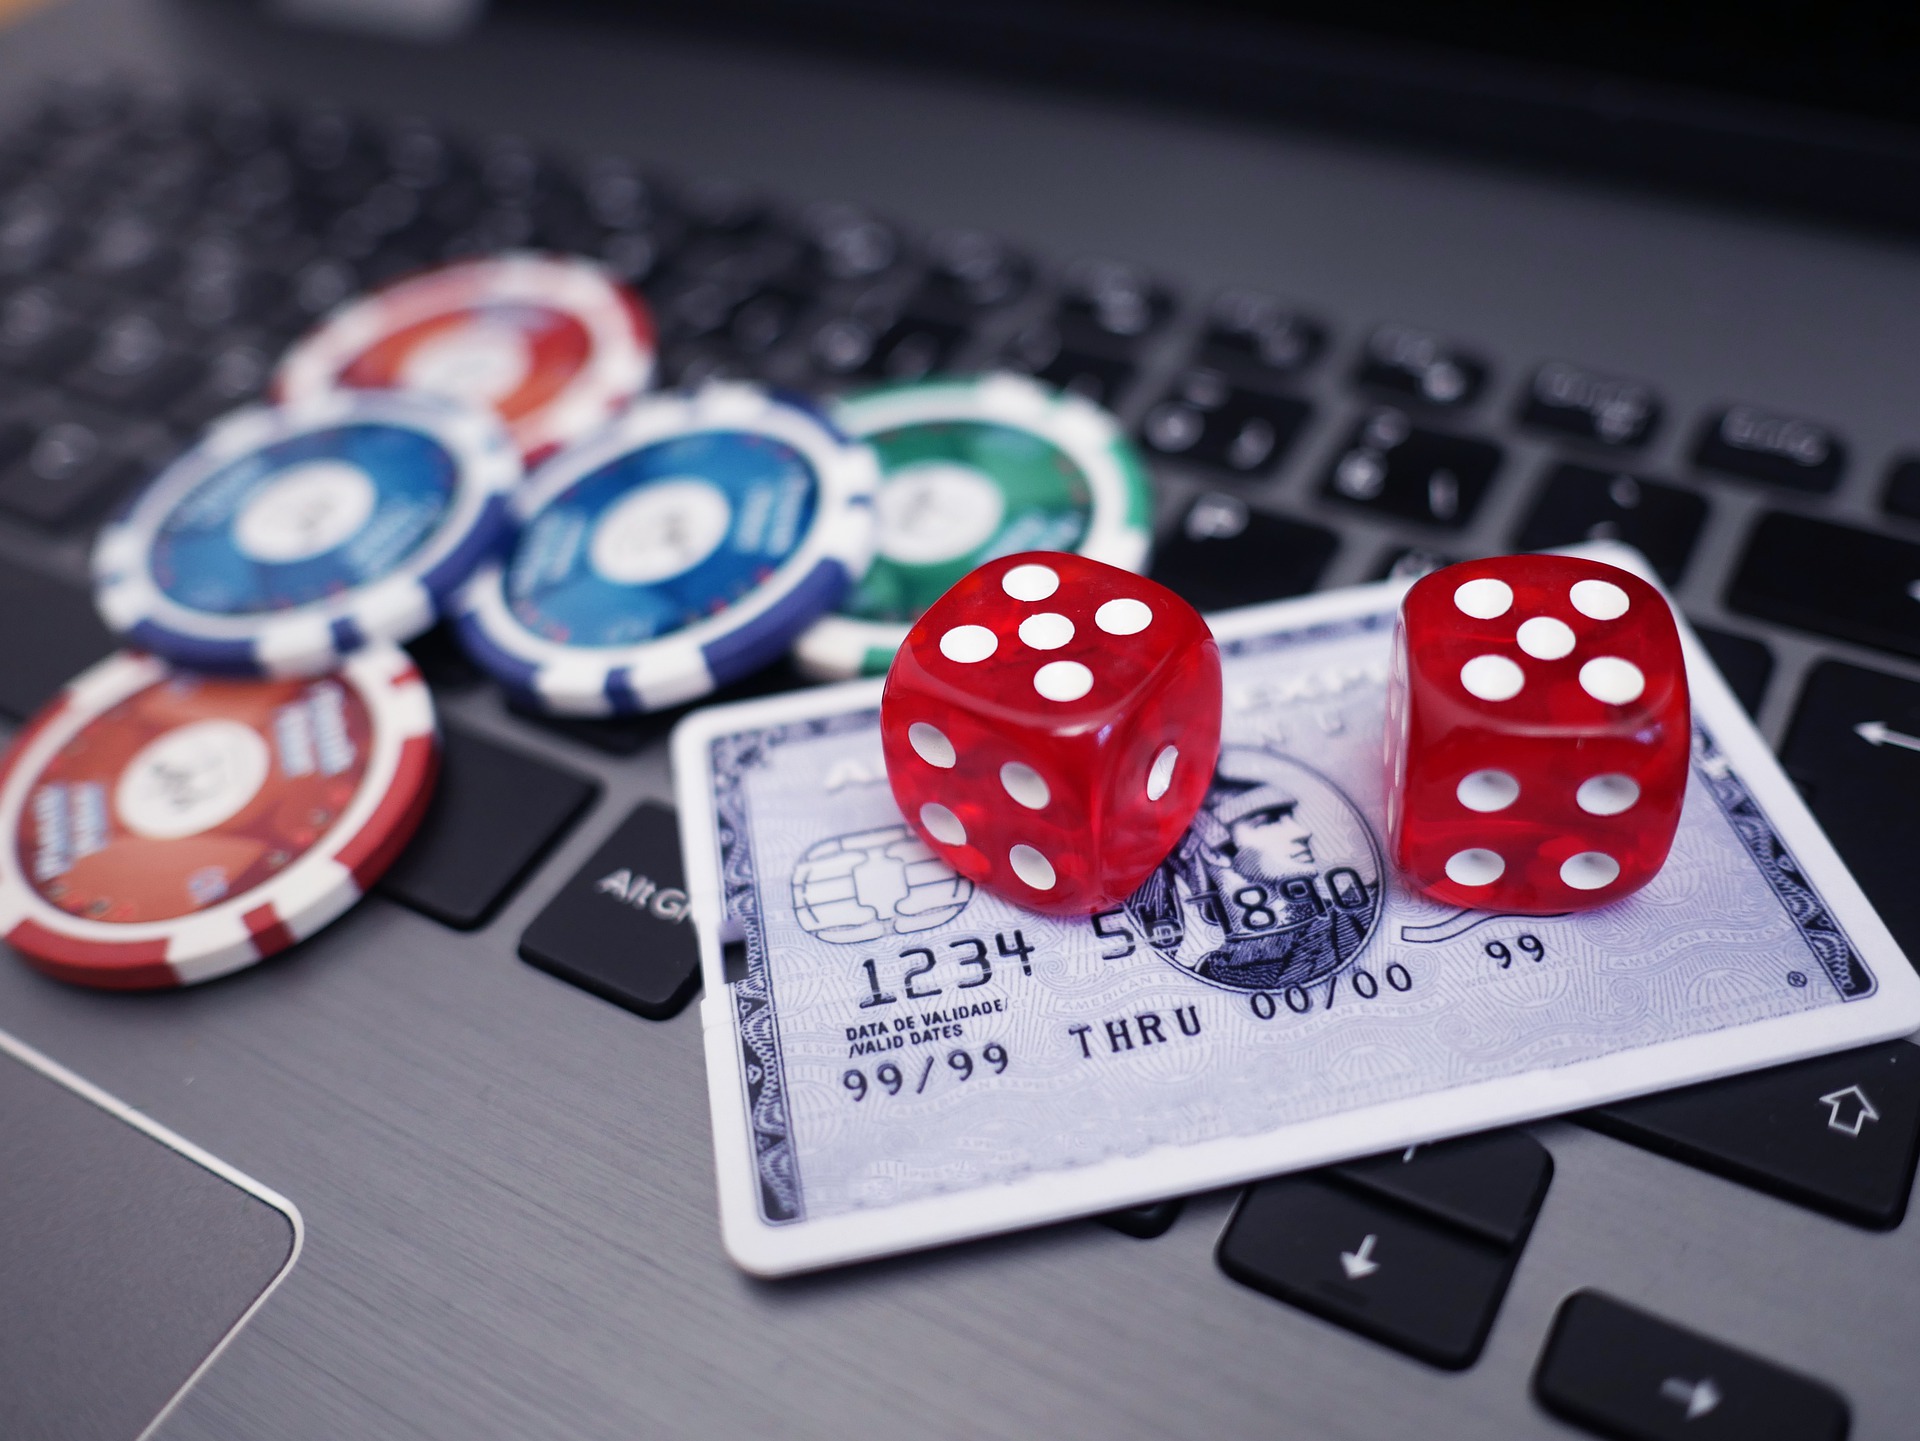 How to start With bitcoin casino sites in 2021